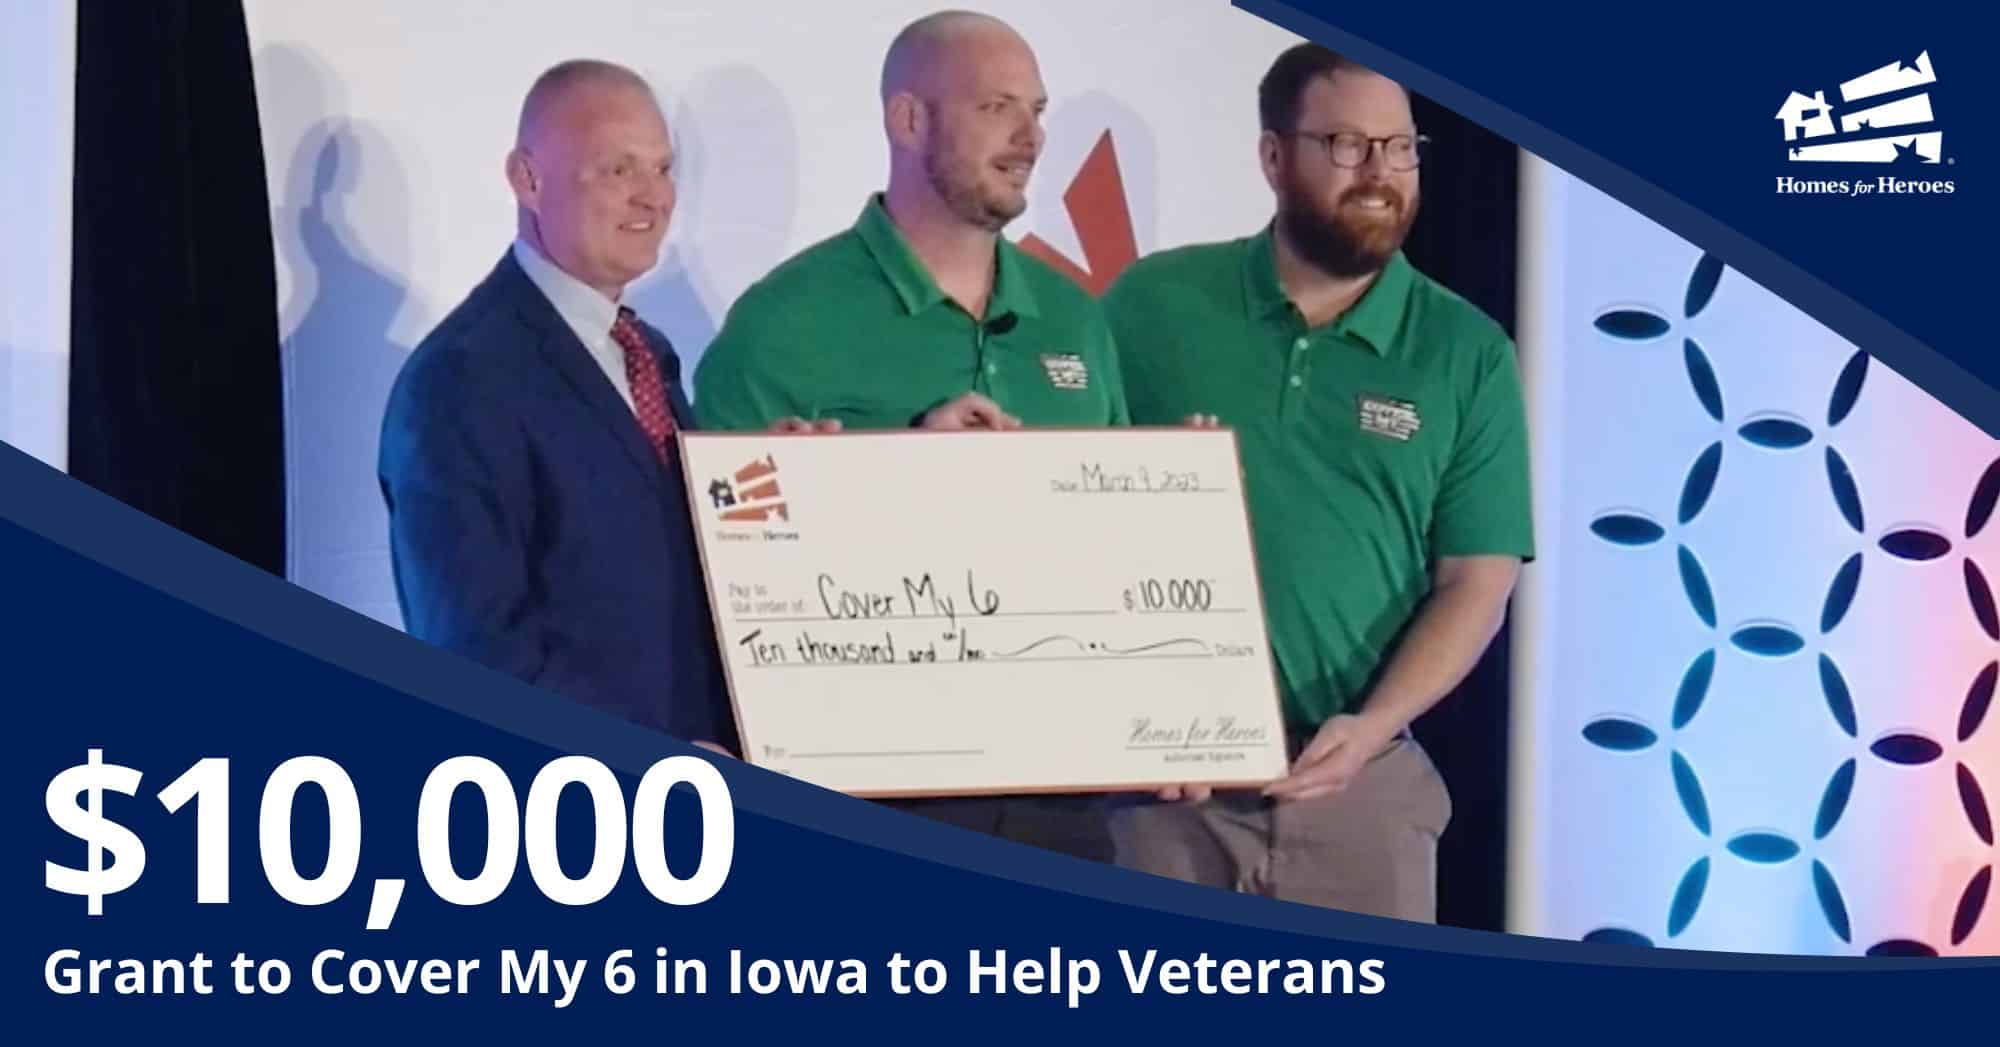 cover my 6 in iowa receives 10000 grant Homes for Heroes Foundation